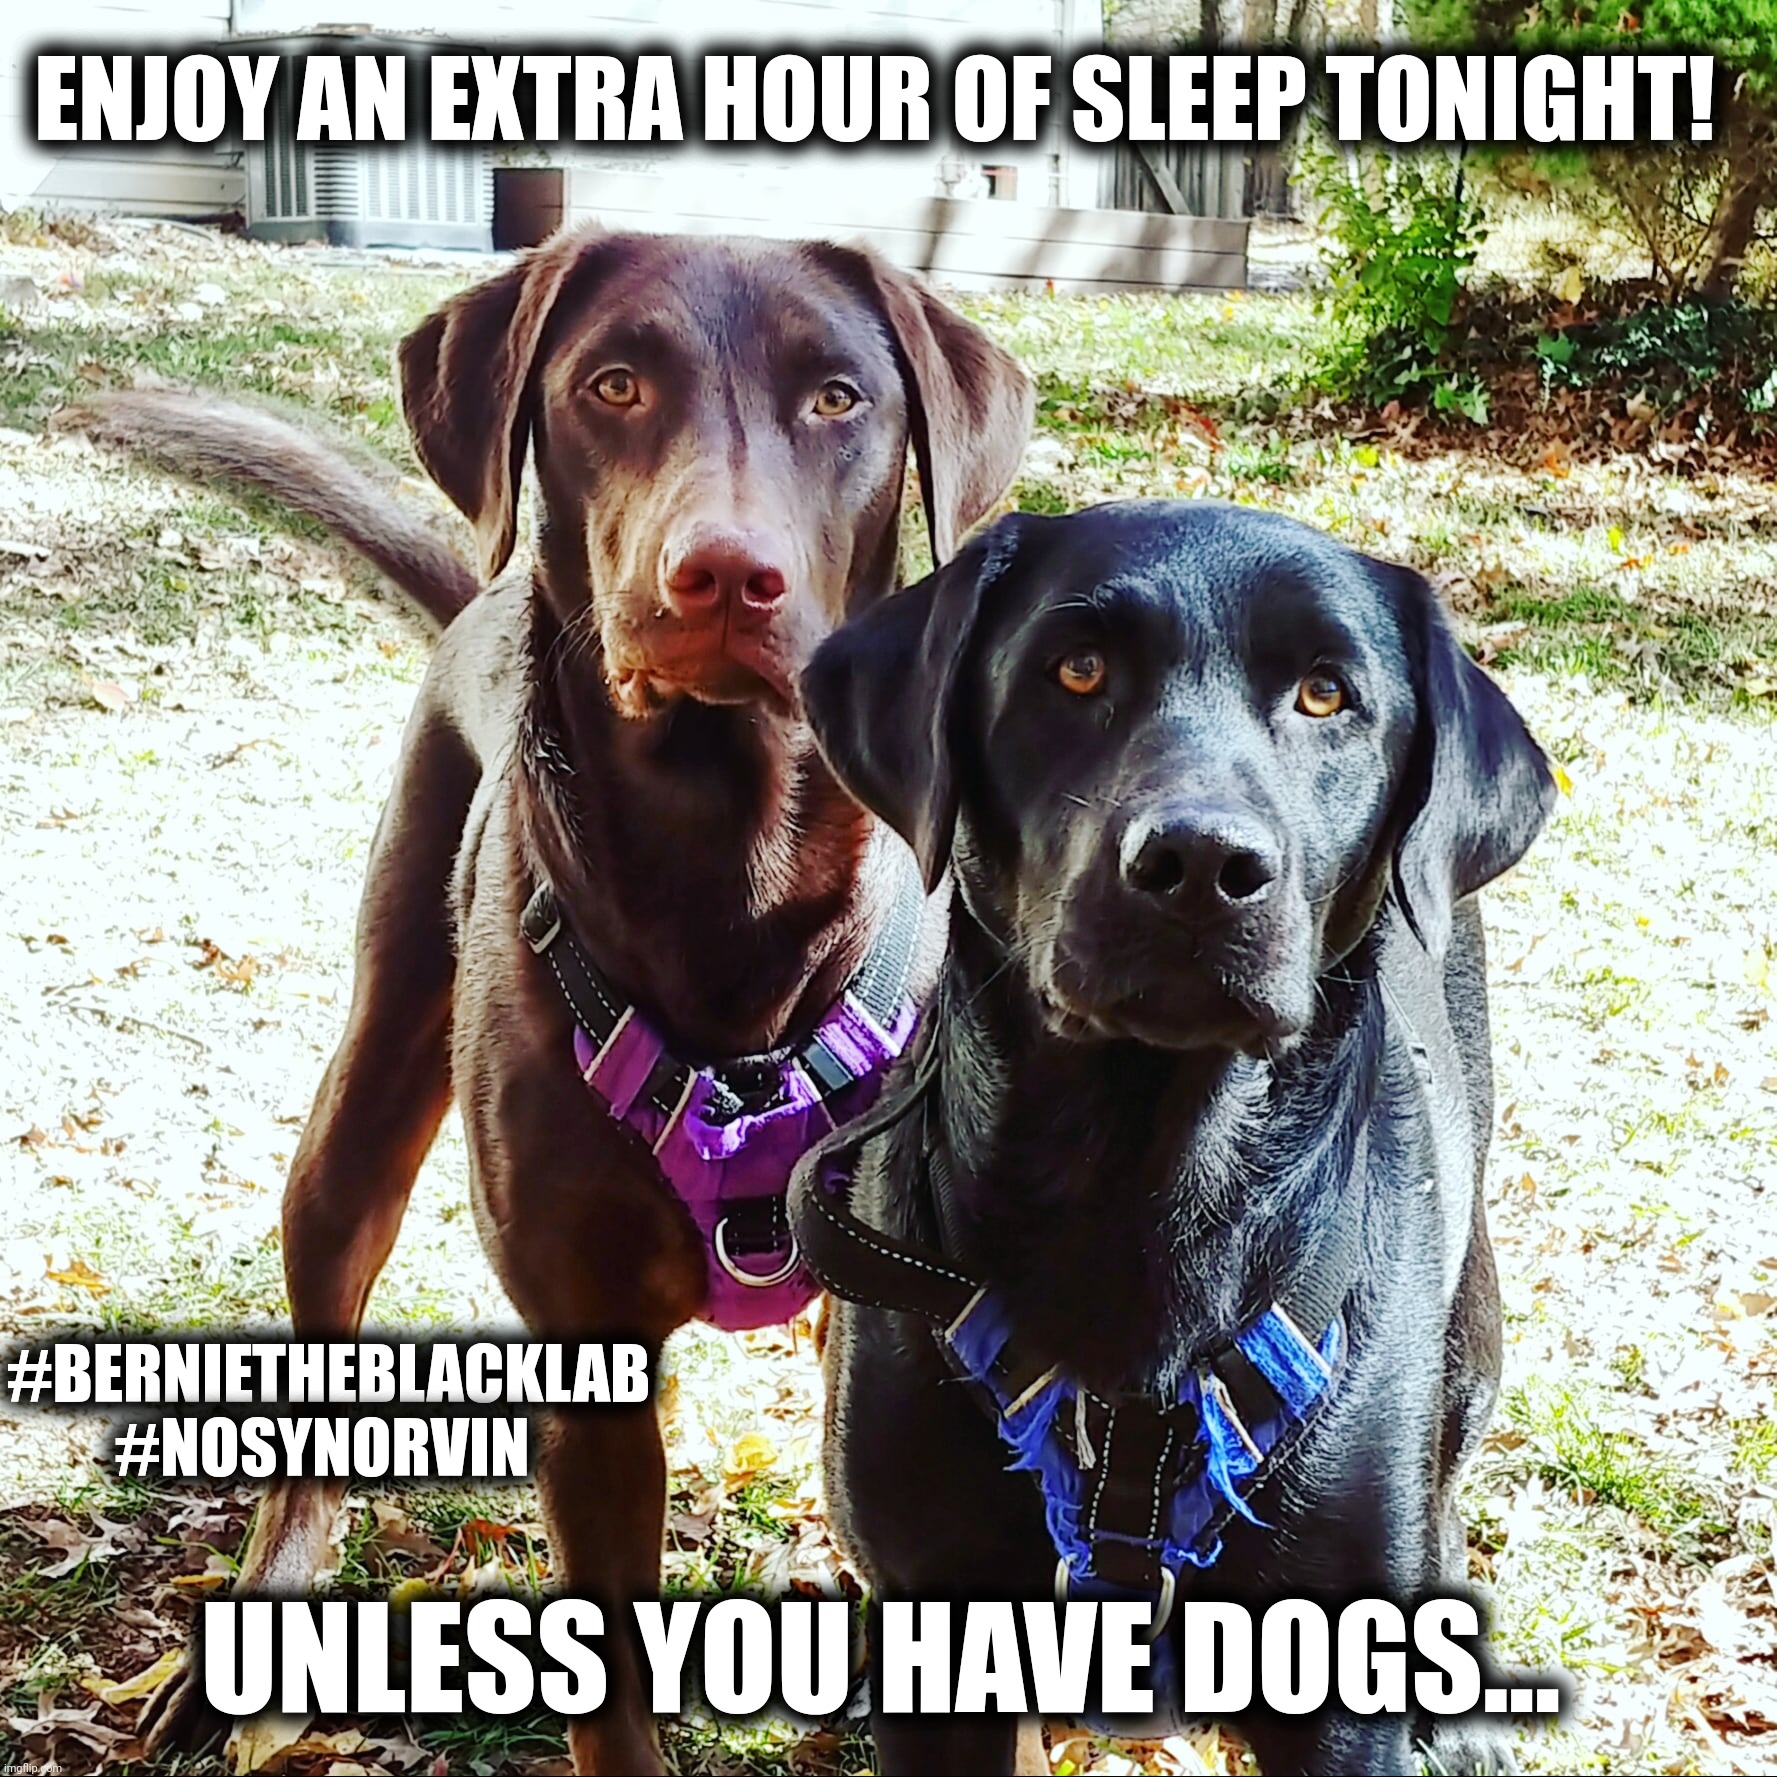 Daylight Savings | ENJOY AN EXTRA HOUR OF SLEEP TONIGHT! #BERNIETHEBLACKLAB
#NOSYNORVIN; UNLESS YOU HAVE DOGS... | image tagged in dogs,daylight savings time,fall back,time change,funny,memes | made w/ Imgflip meme maker